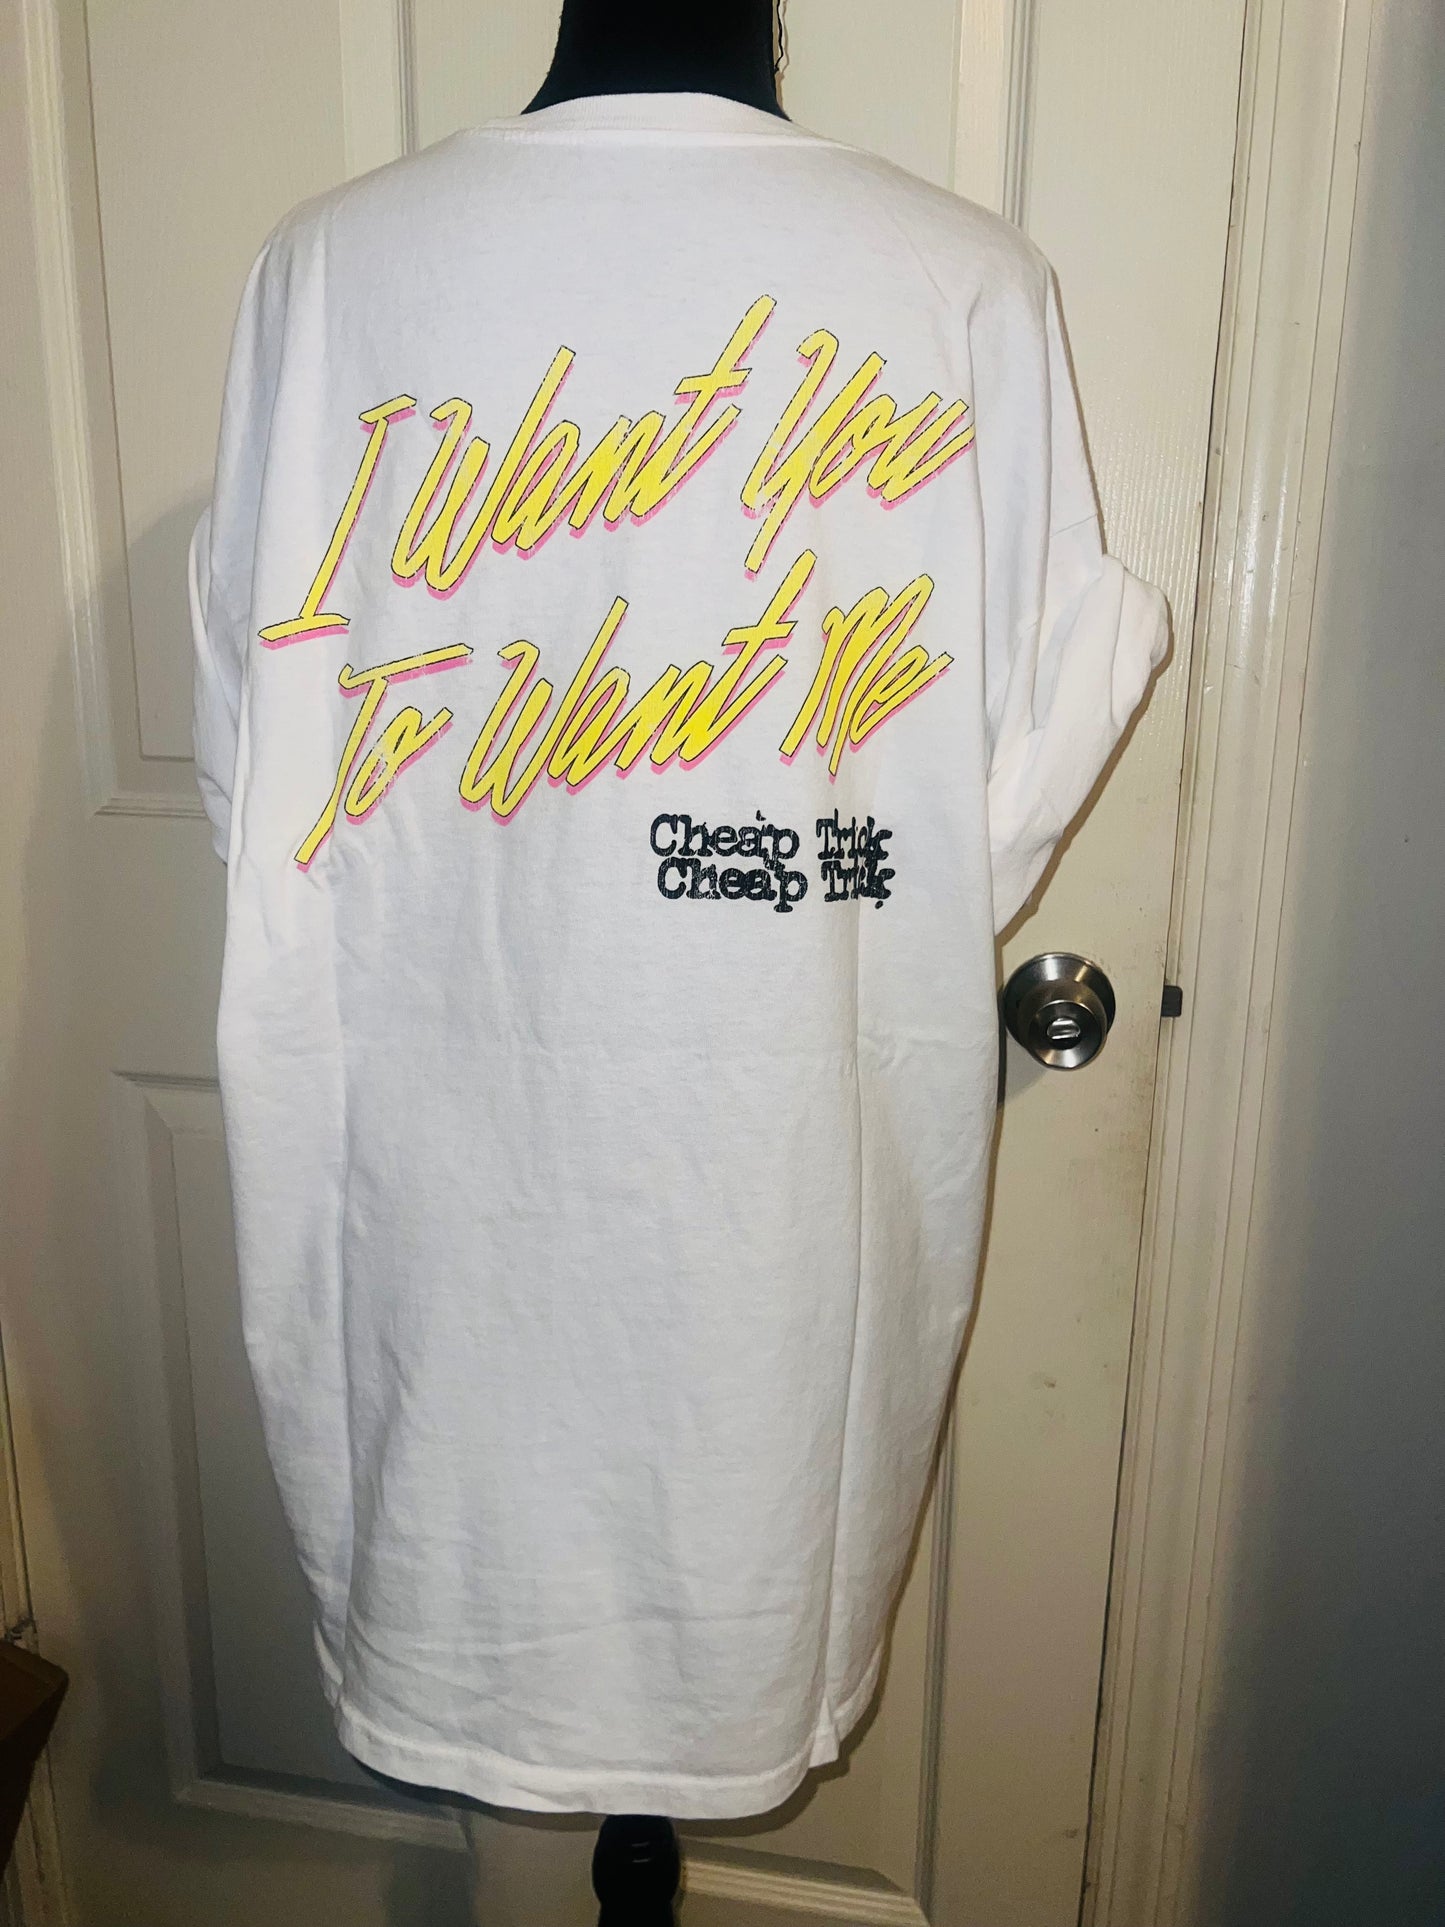 Cheap Trick Double Sided Oversized Tee